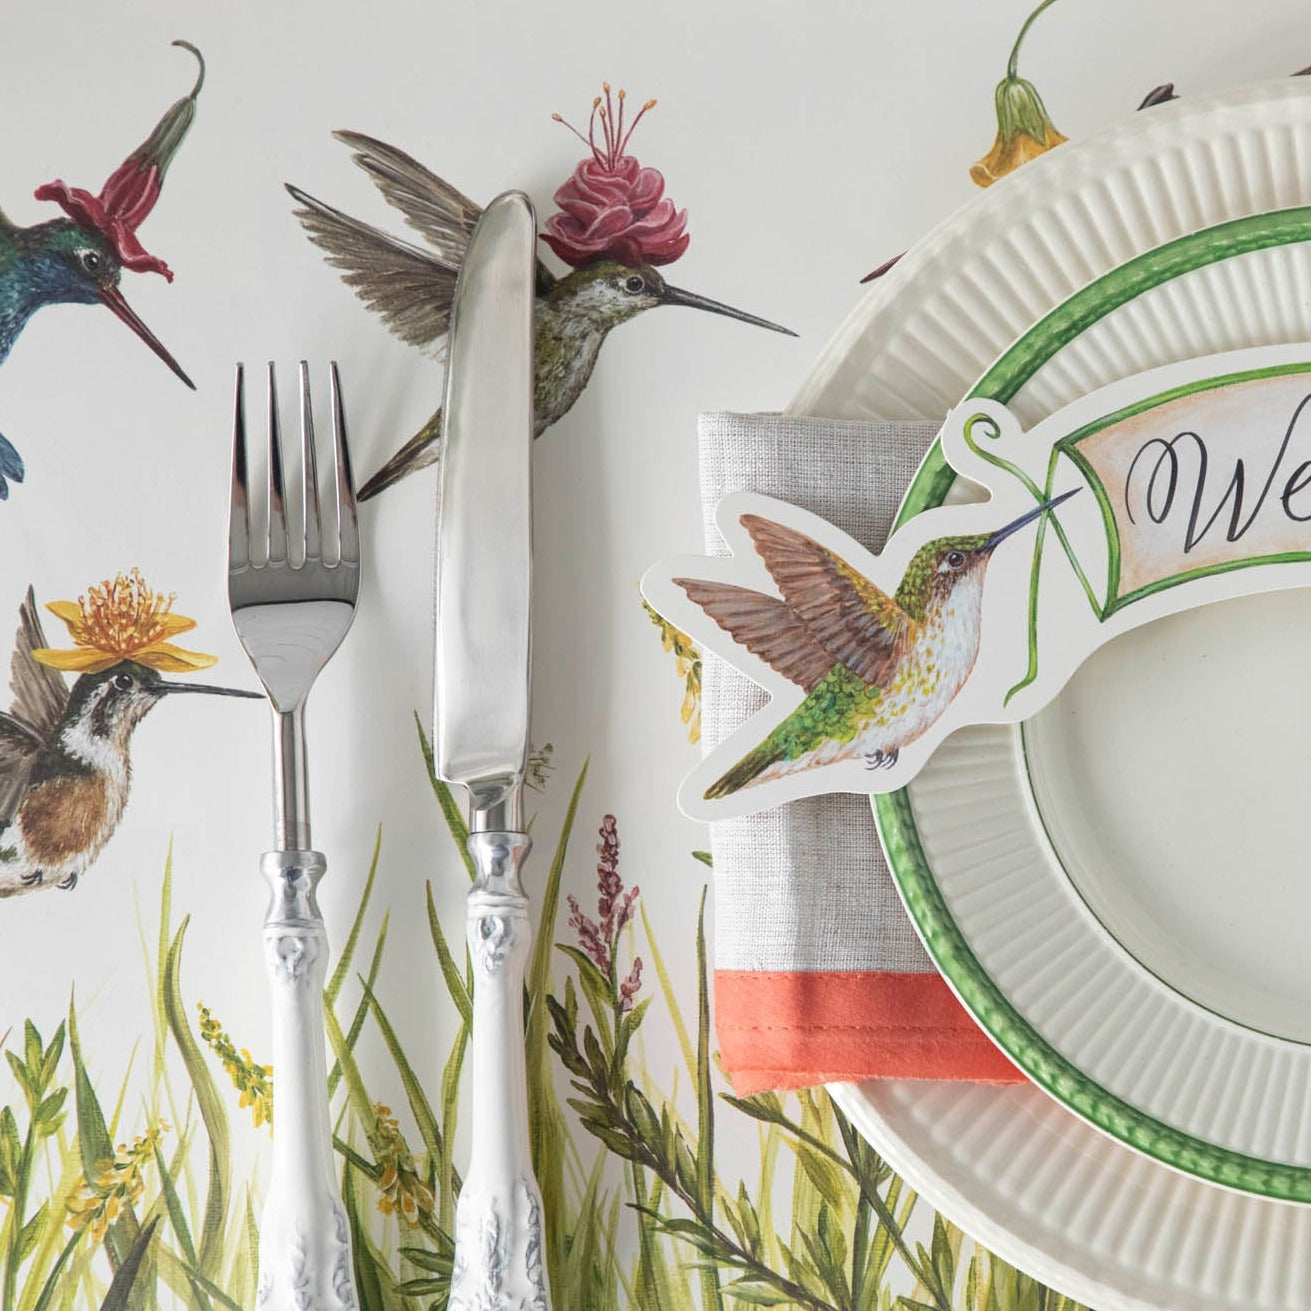 Close-up of the Hummingbirds Placemat under a place setting, showing hummingbirds with flower hats in detail.